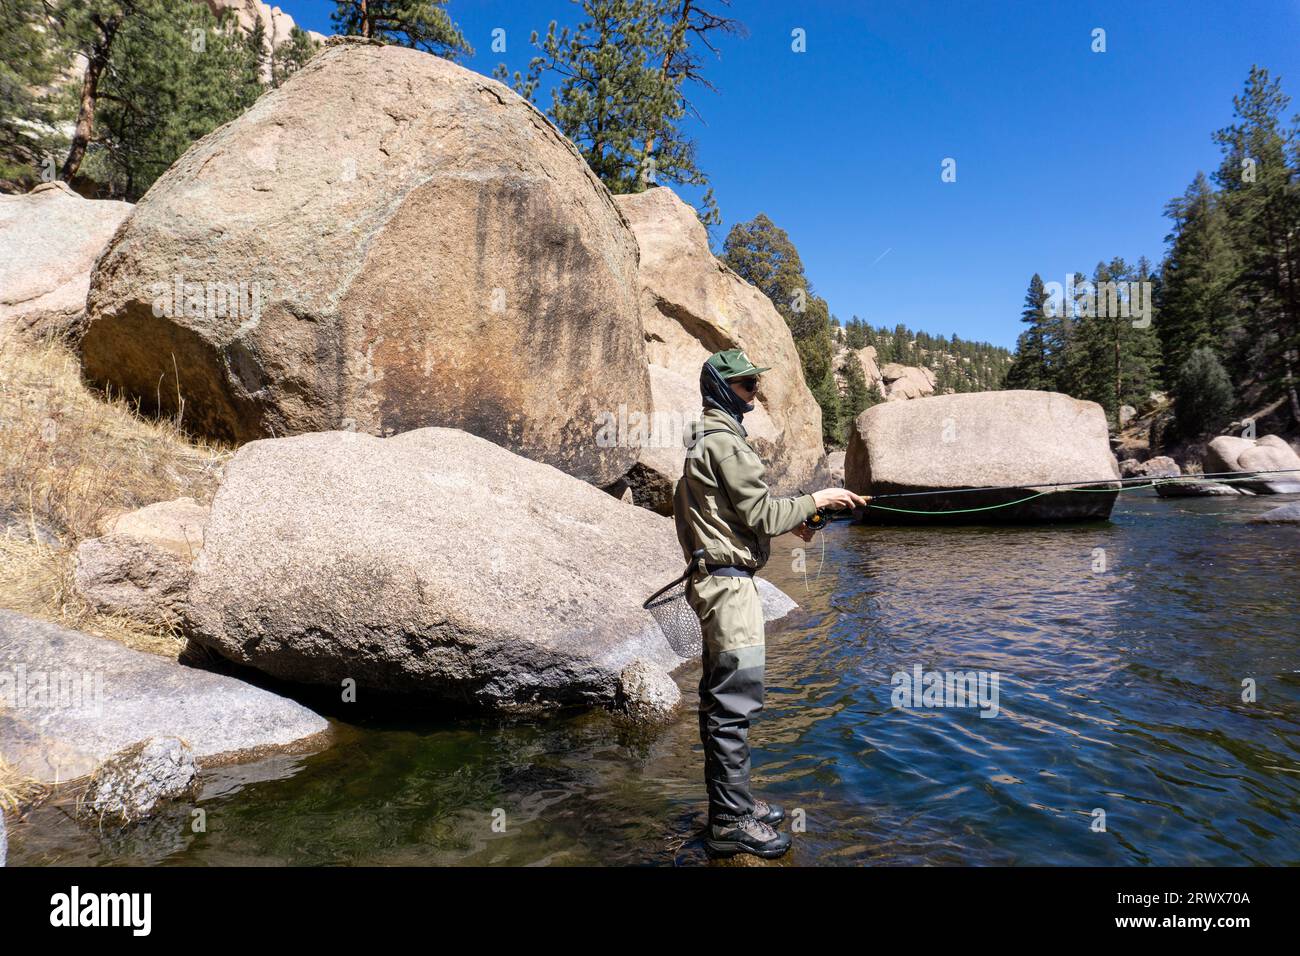 Fly fishing rod with cork handle grip and a left hand retrieve fly fishing  reel spooled with fly line Colorado USA Stock Photo - Alamy